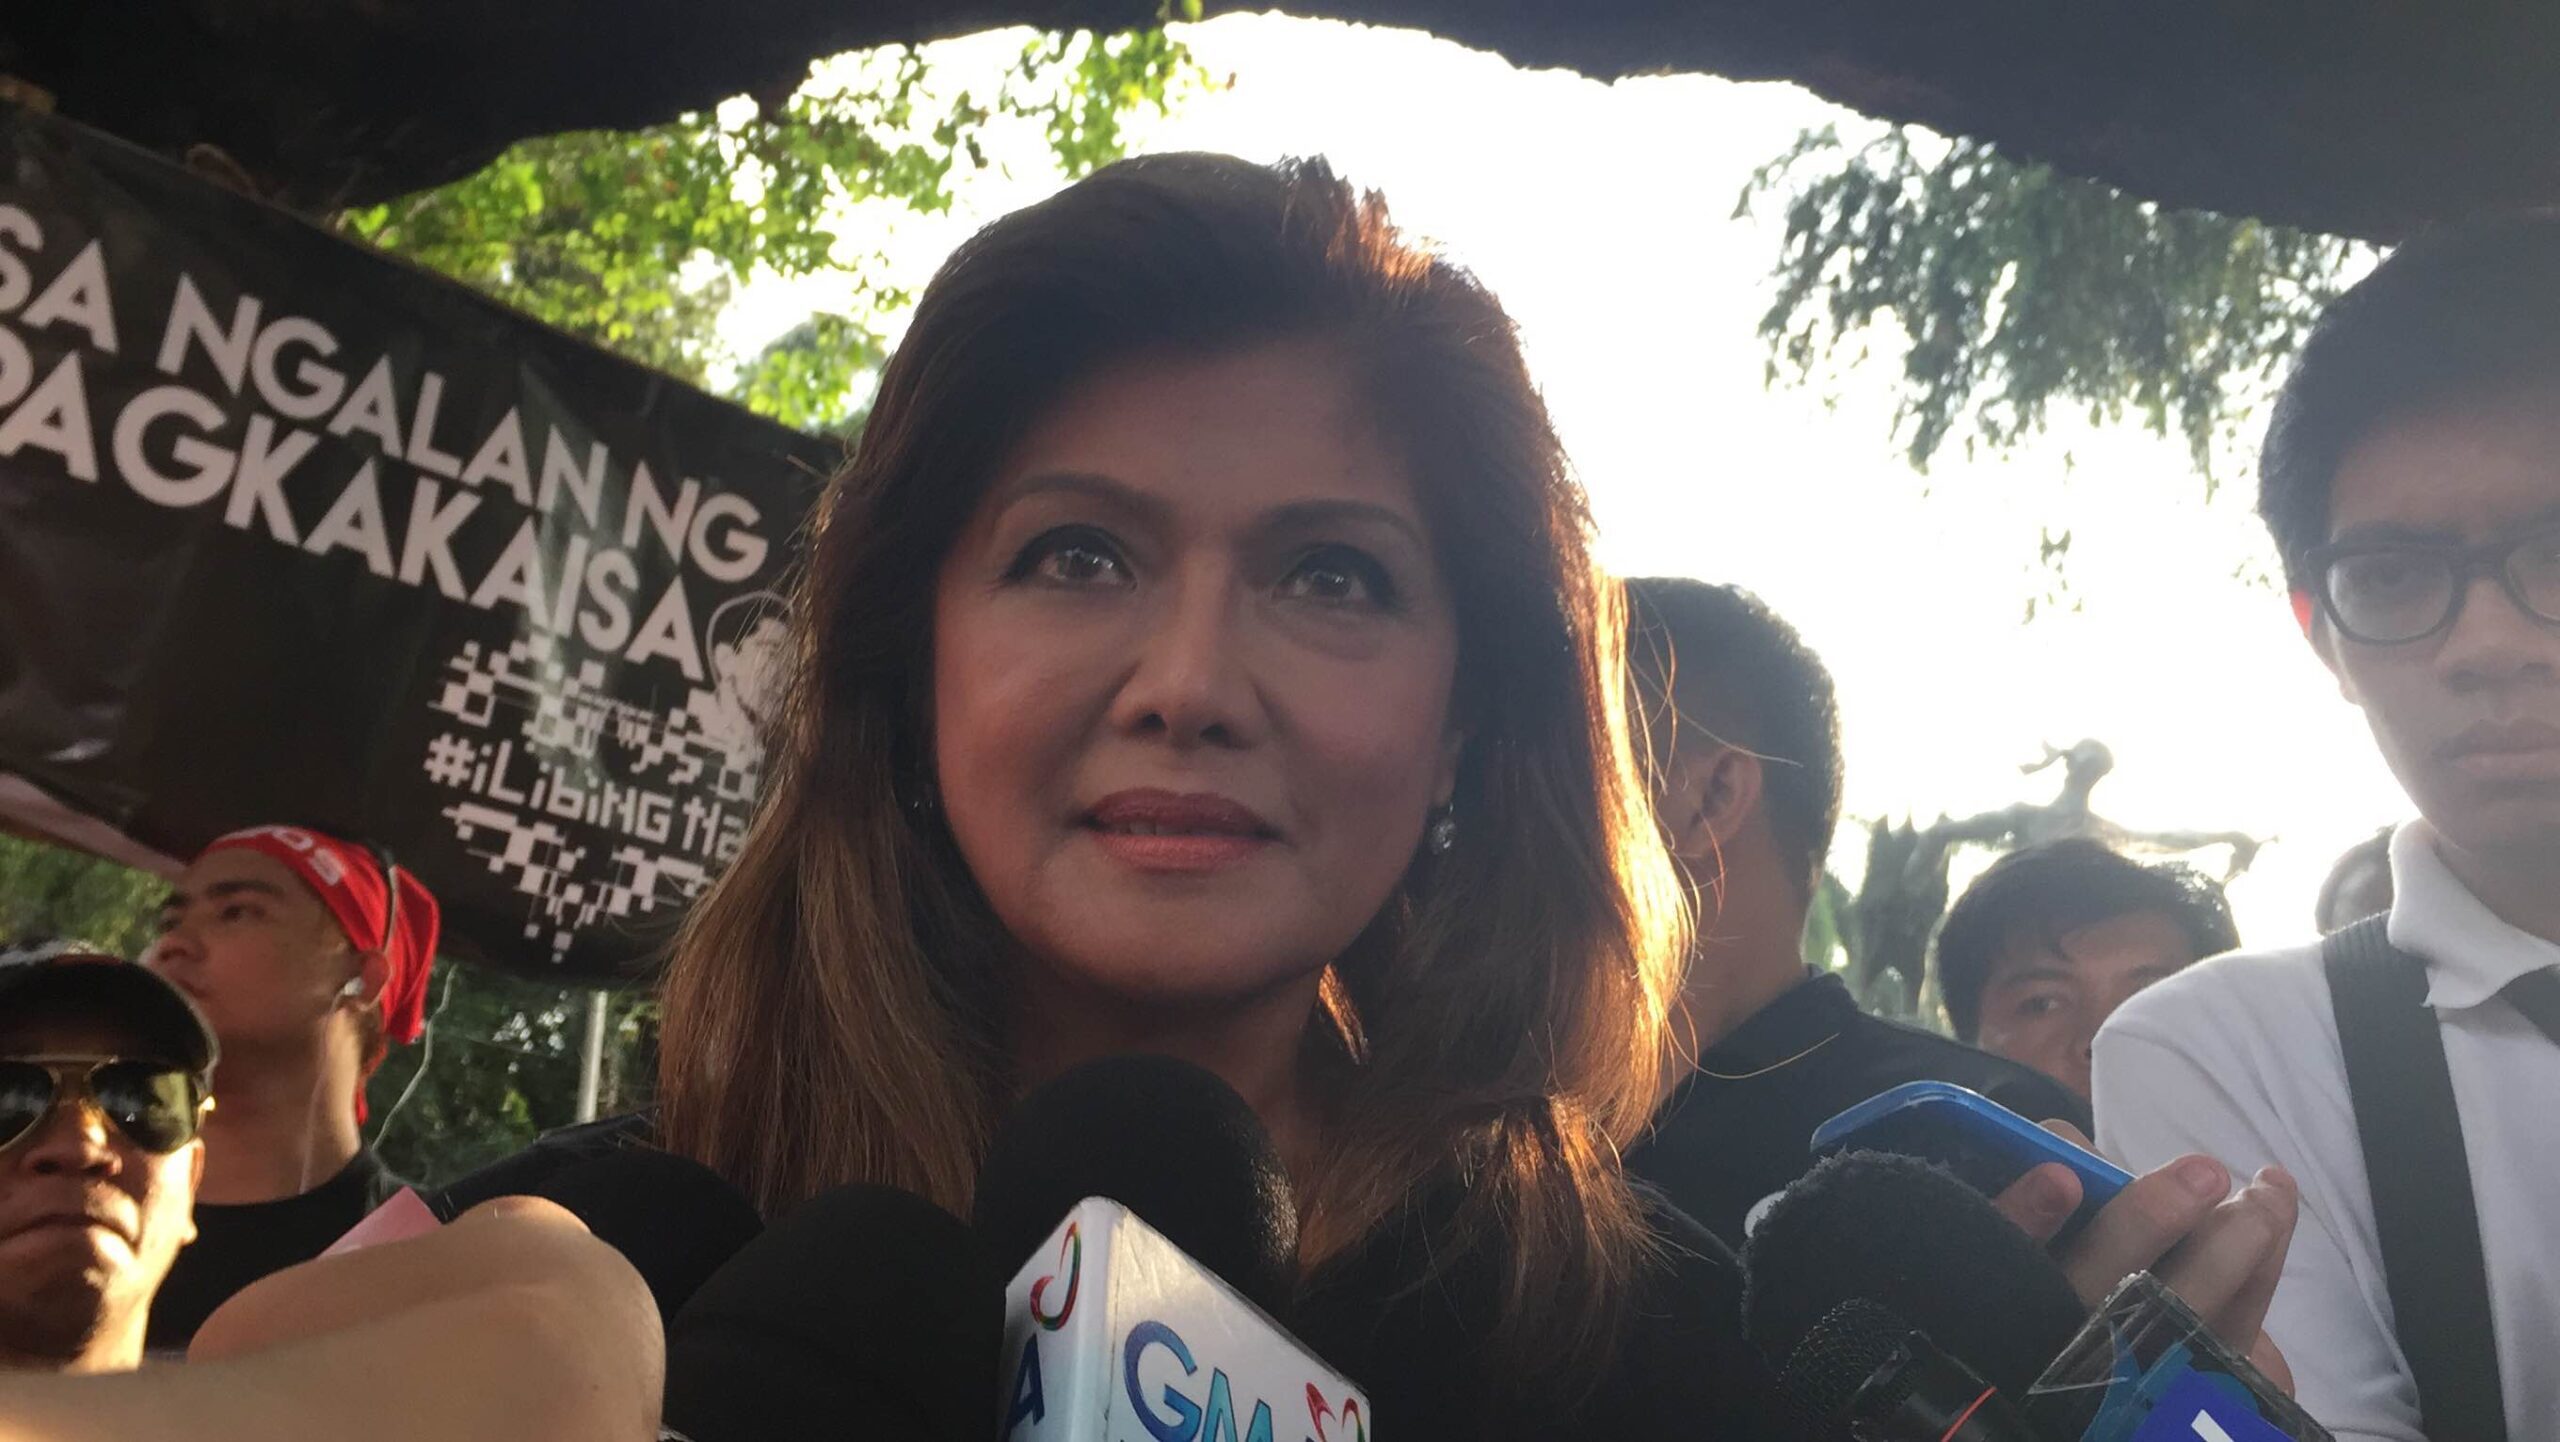 House summons Imee Marcos to tobacco fund hearing